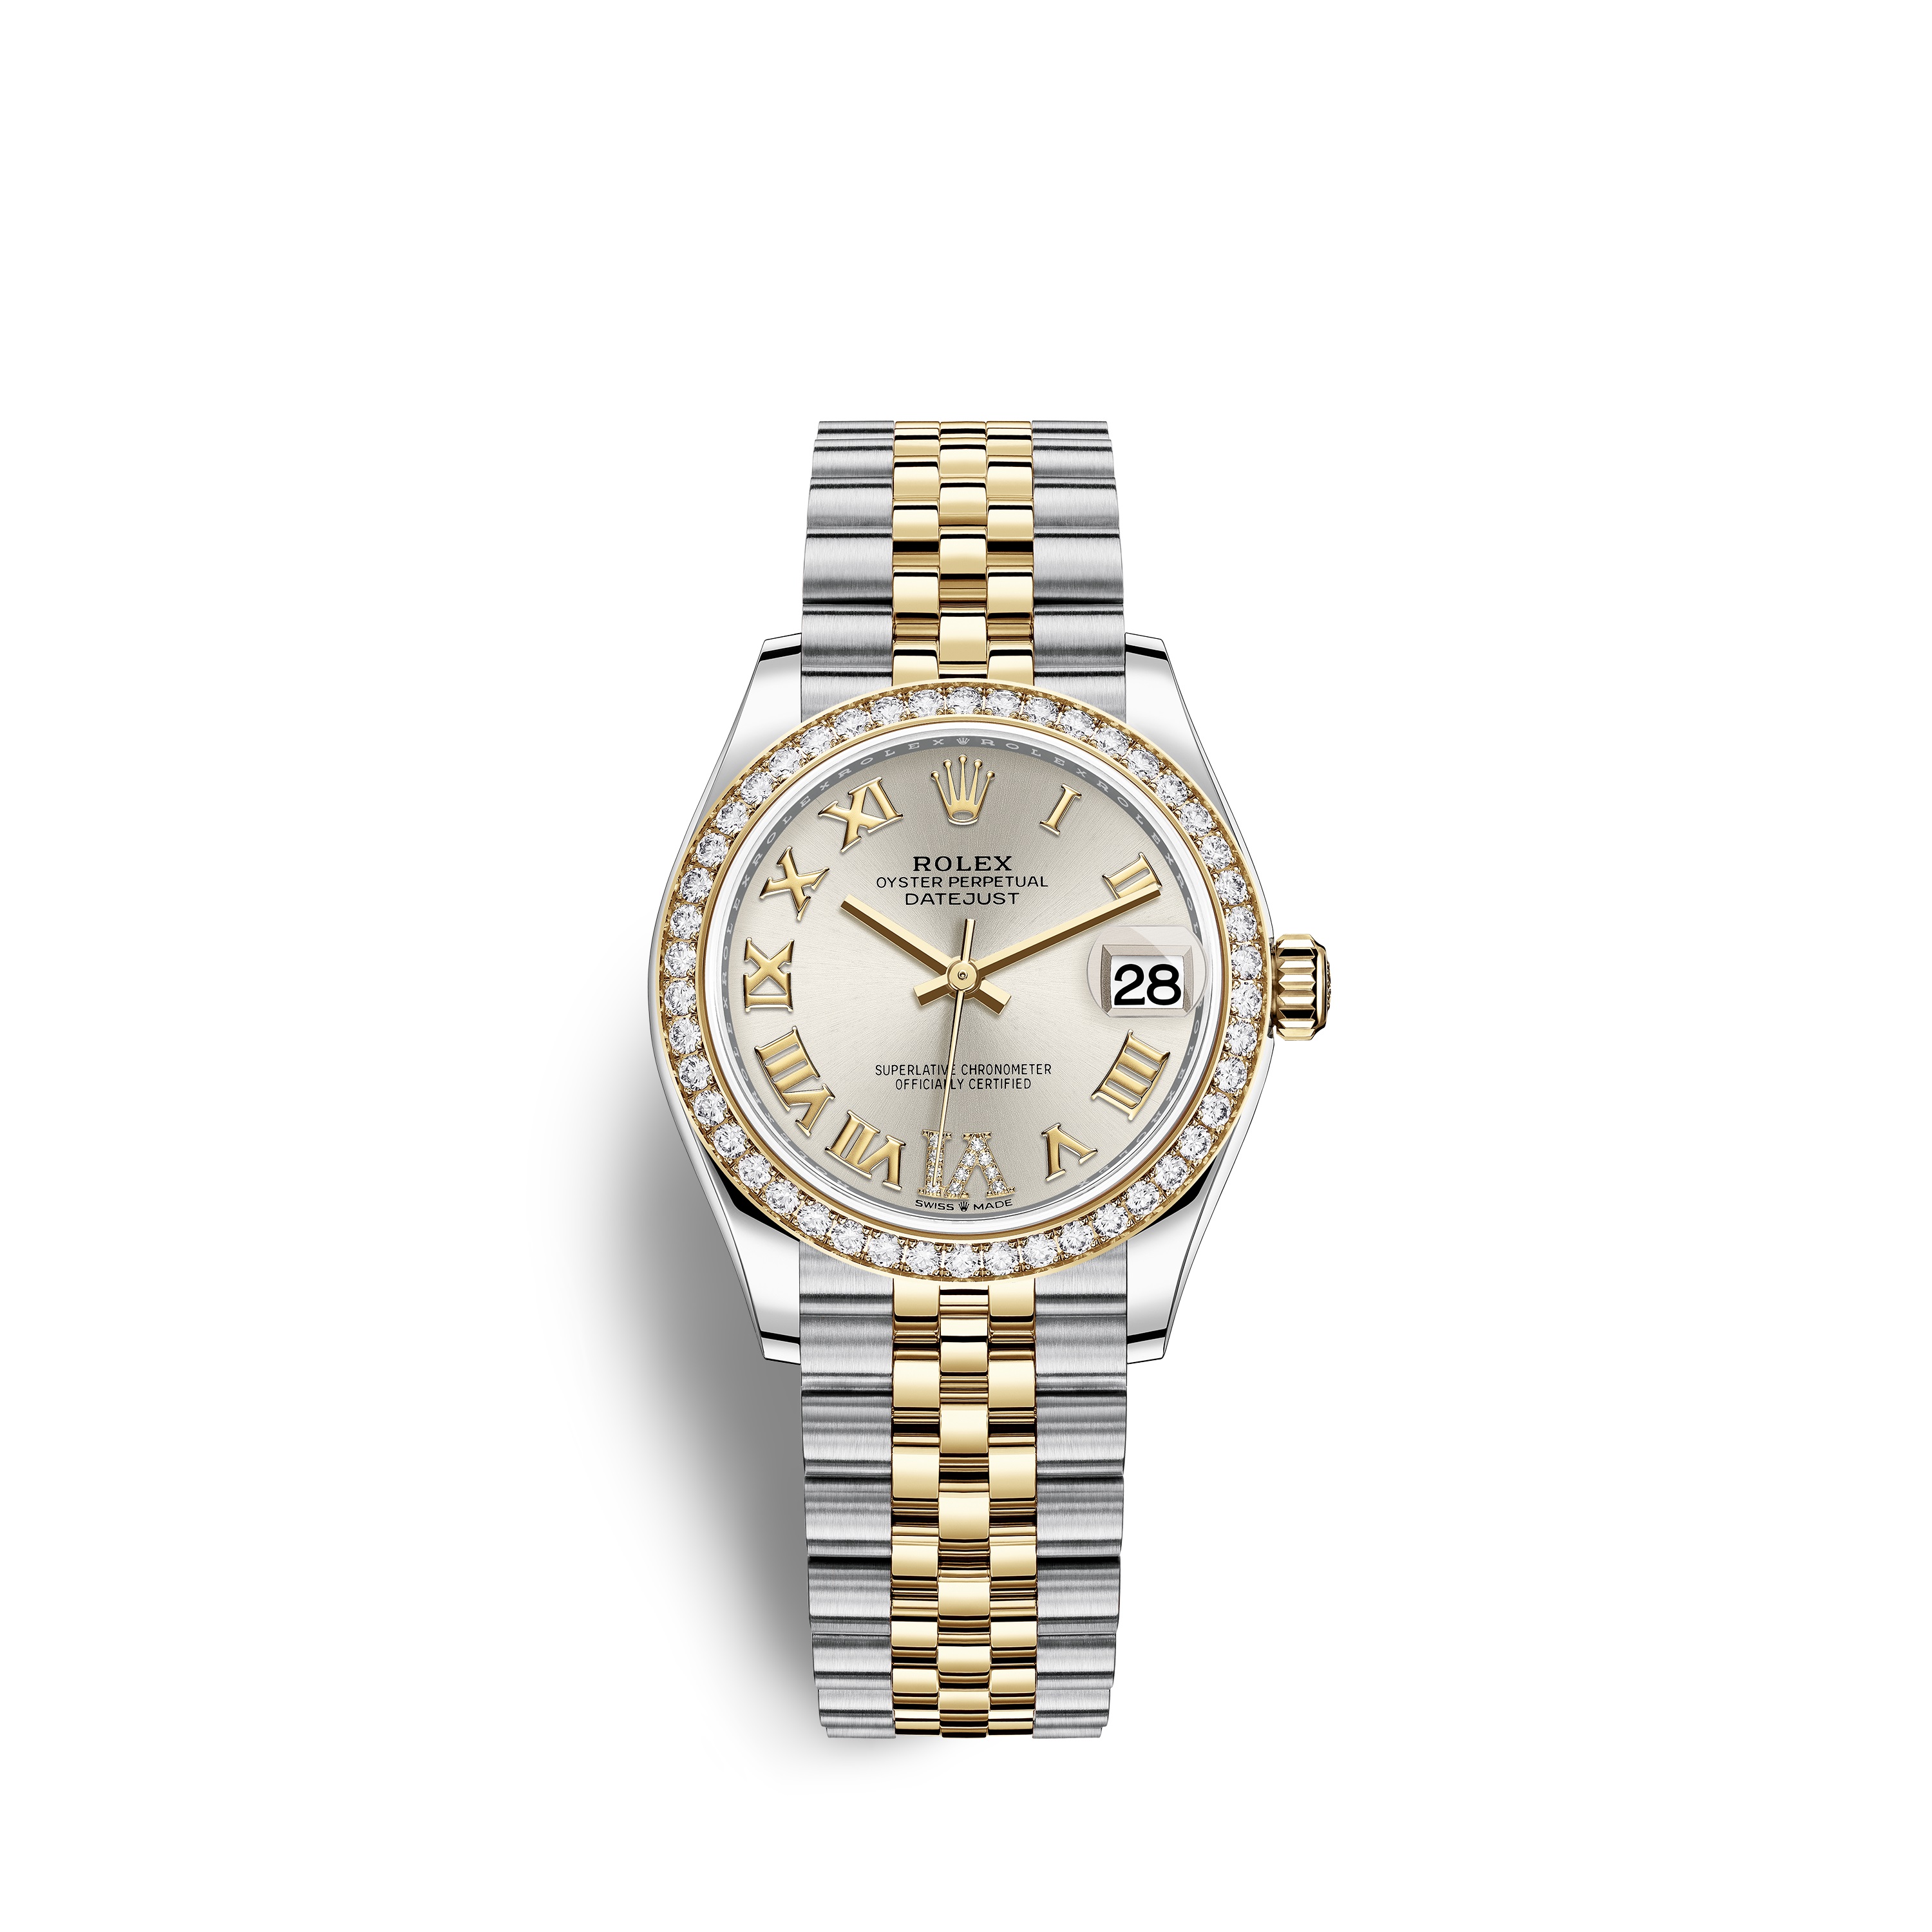 Datejust 31 278383RBR Gold & Stainless Steel Watch (Silver Set with Diamonds)